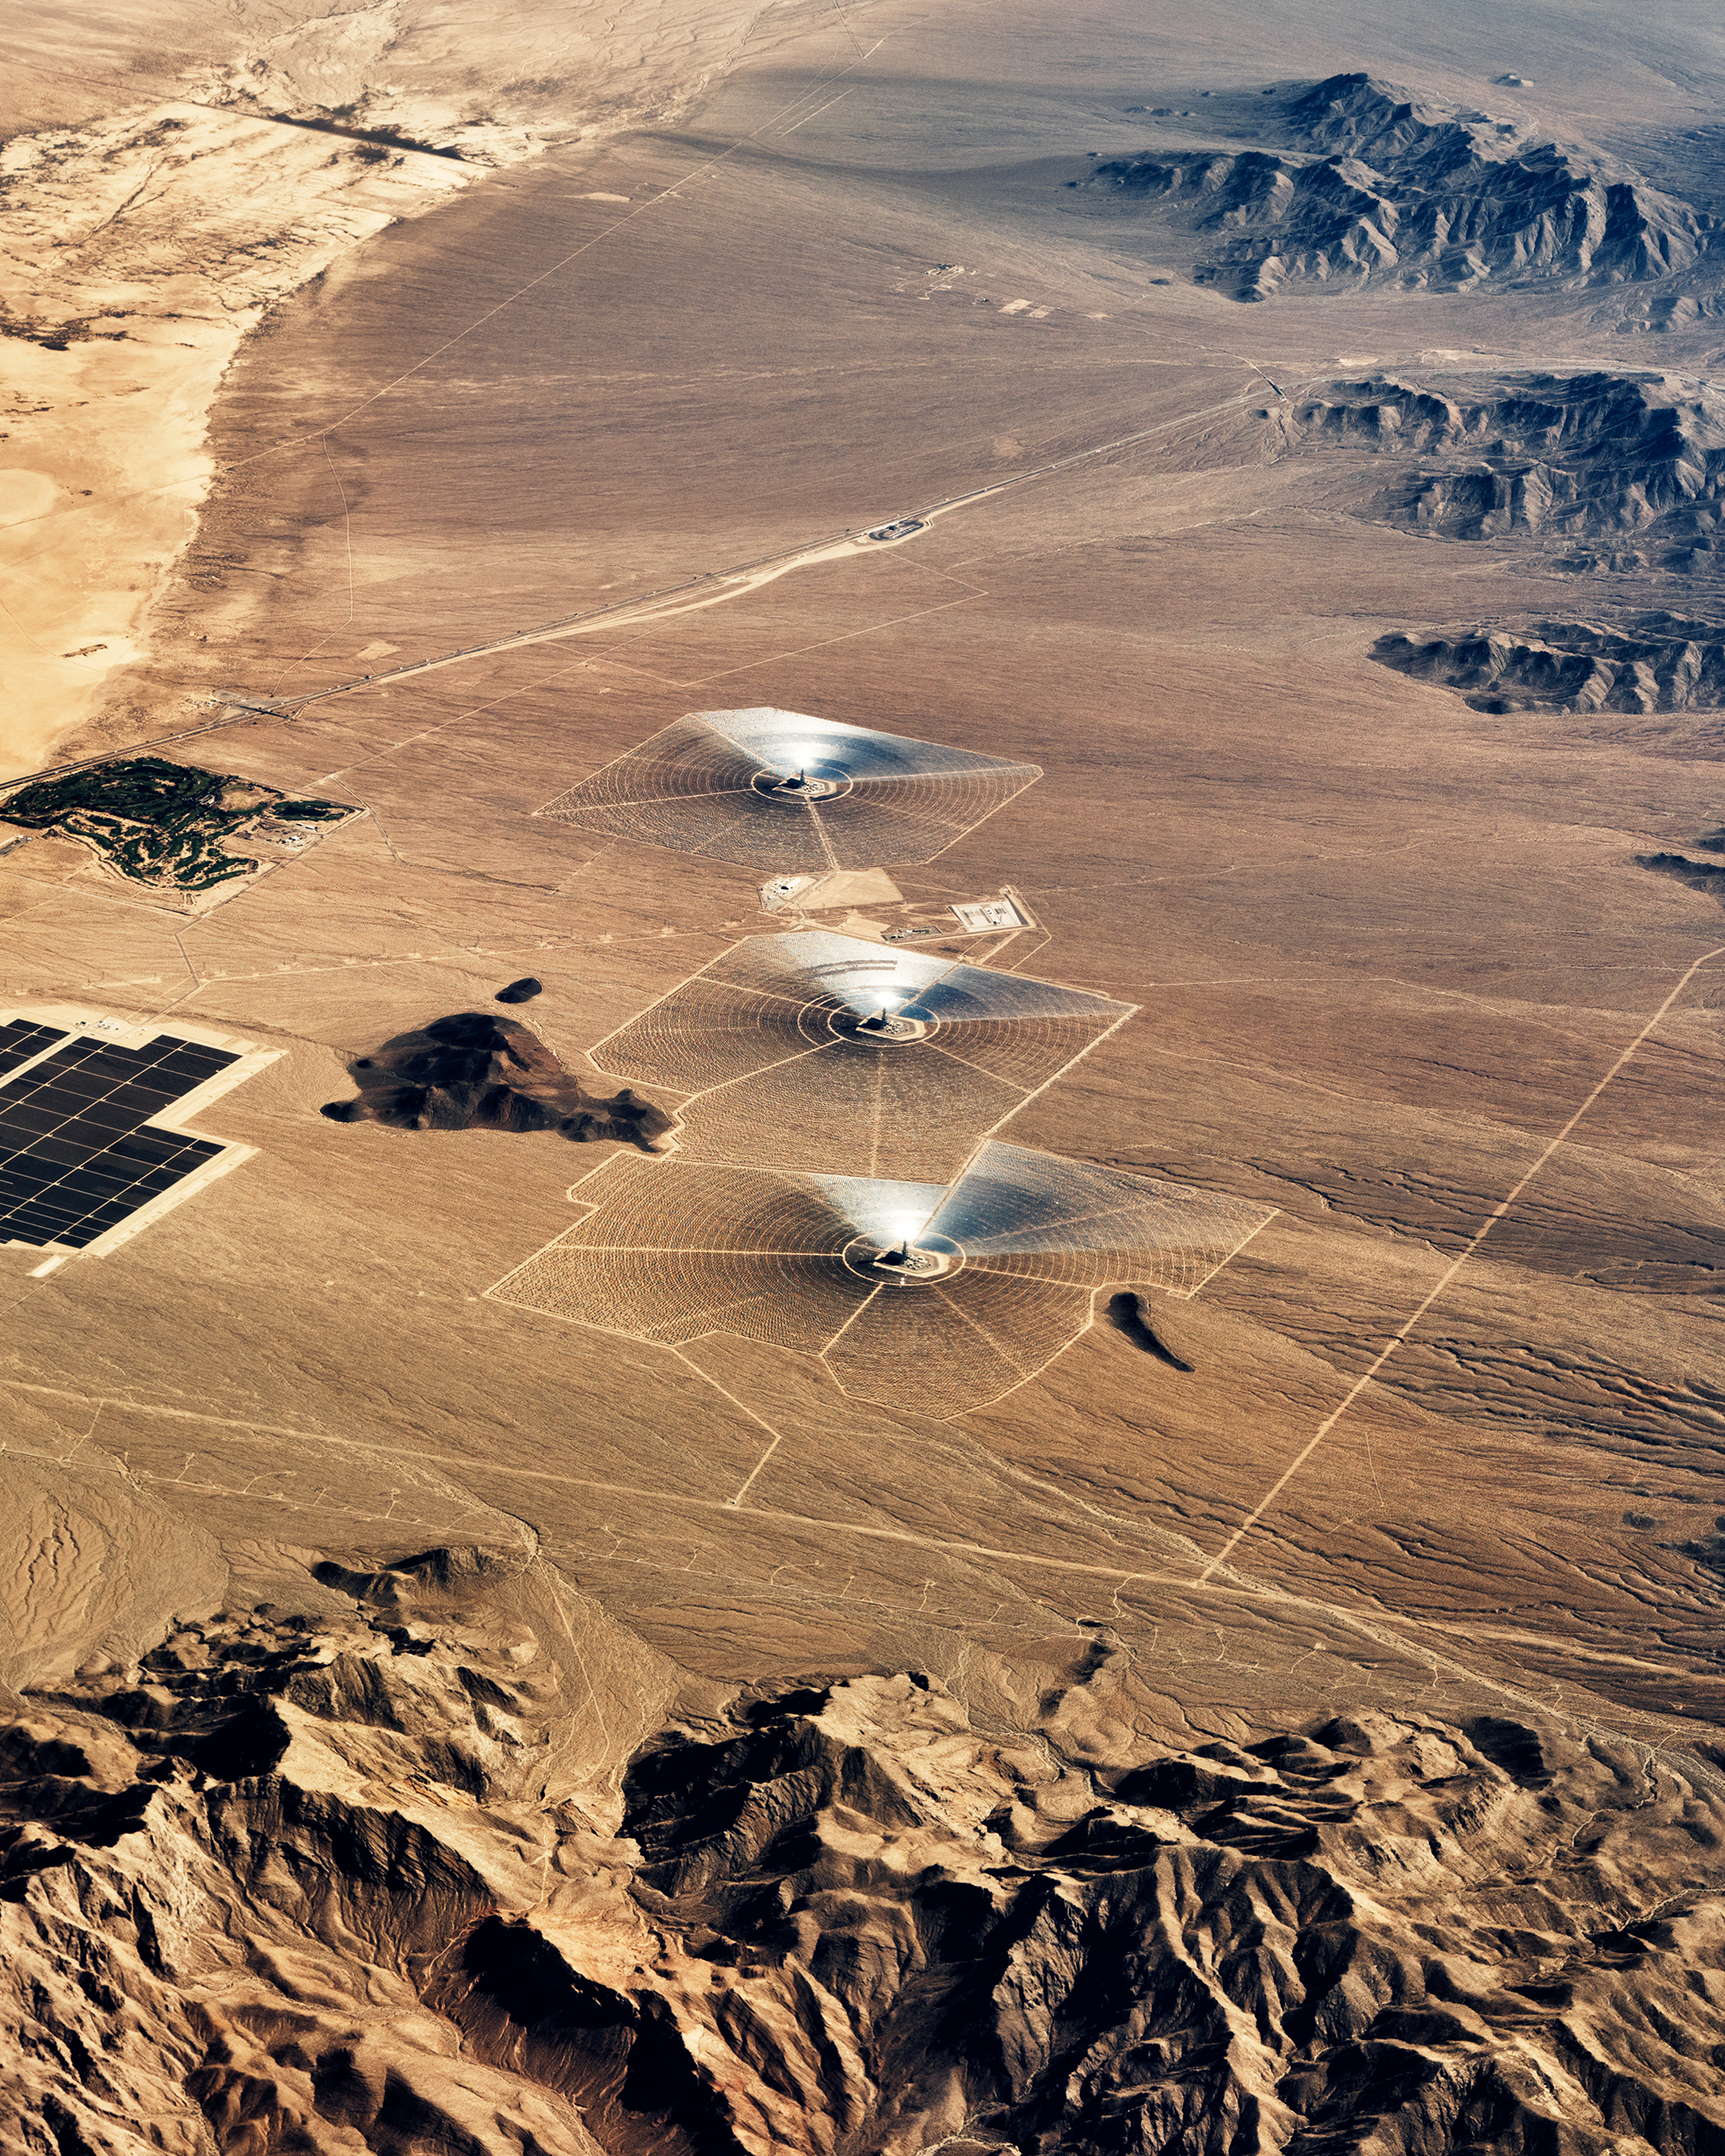 Aerial view of the Ivanpah solar power plant, located in California near the border with Nevada.